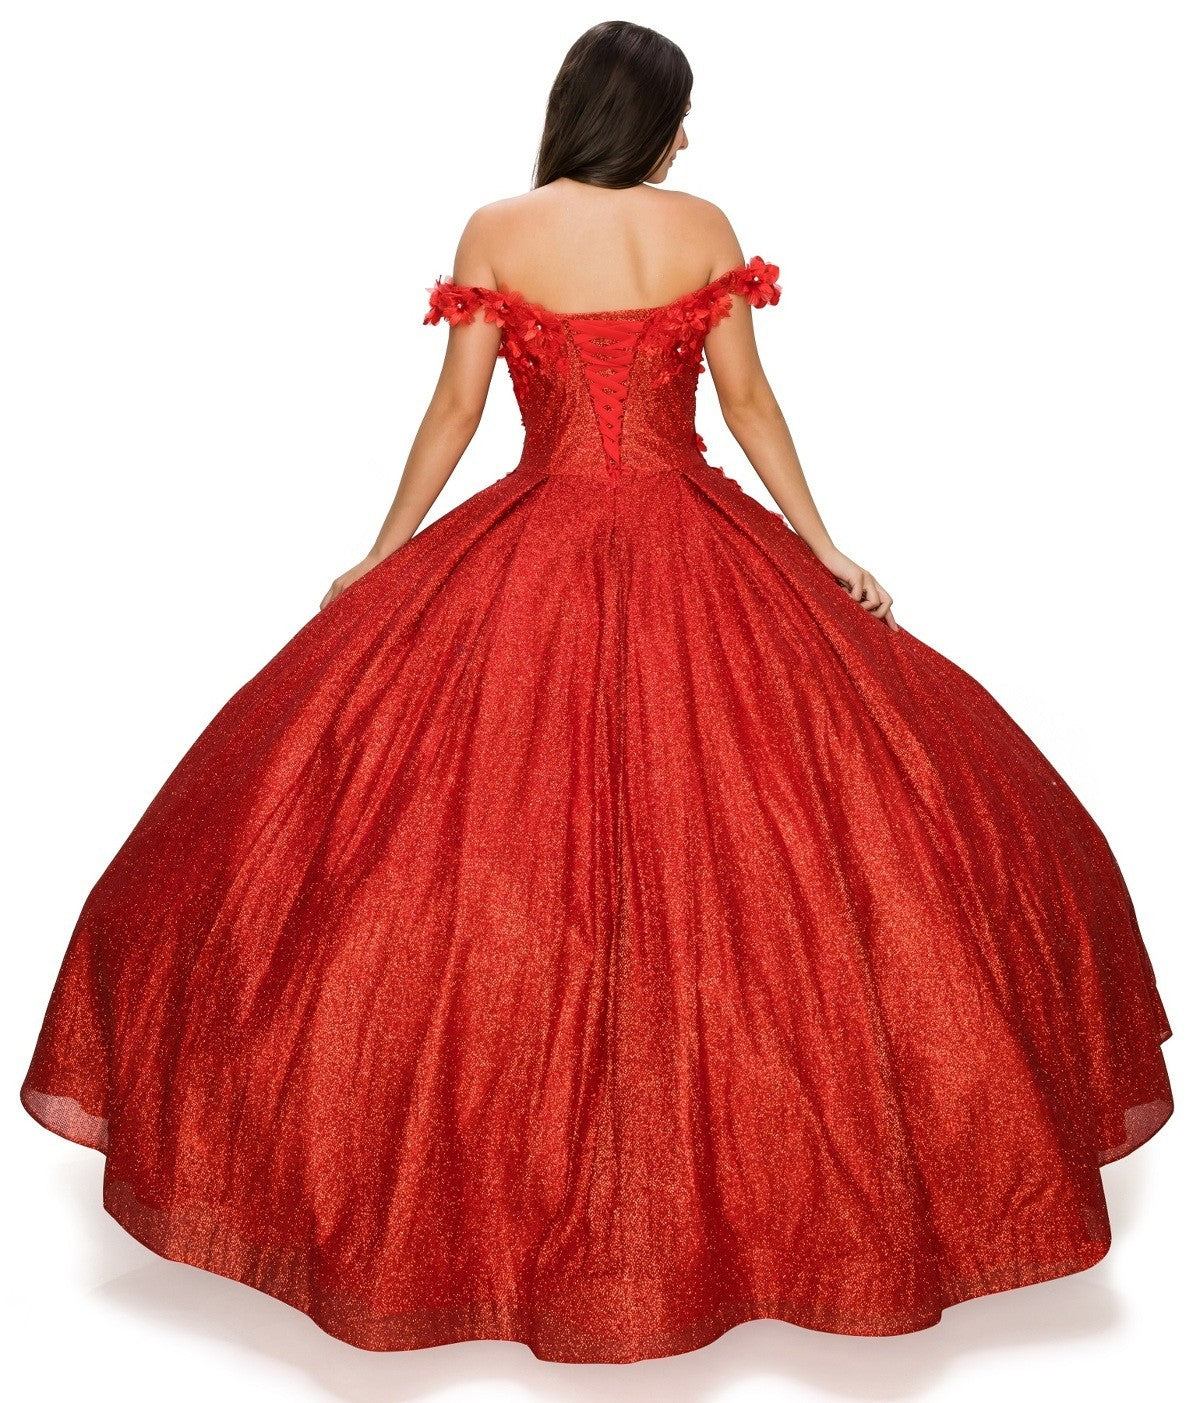 Off the Shoulder floral Satin Quinceanera Dress BY Cinderella Couture USA AS8020J-red